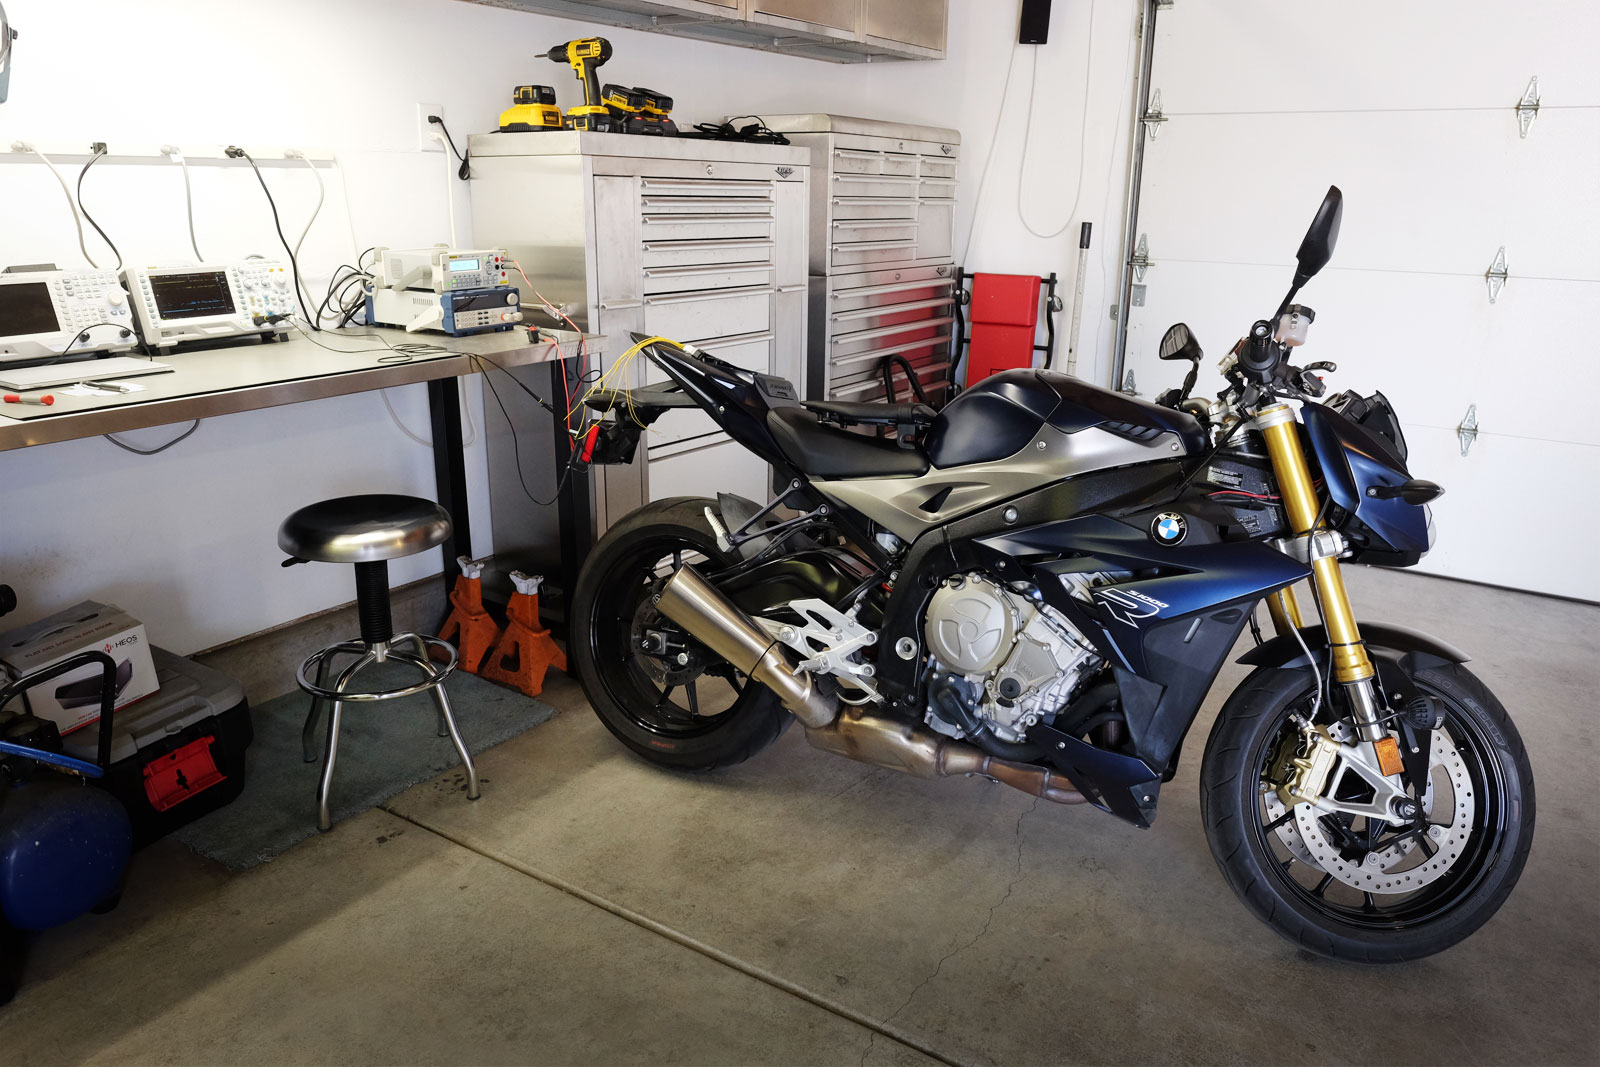 BMW S1000R Motorcycle CANBUS Hacking - Sean Foley